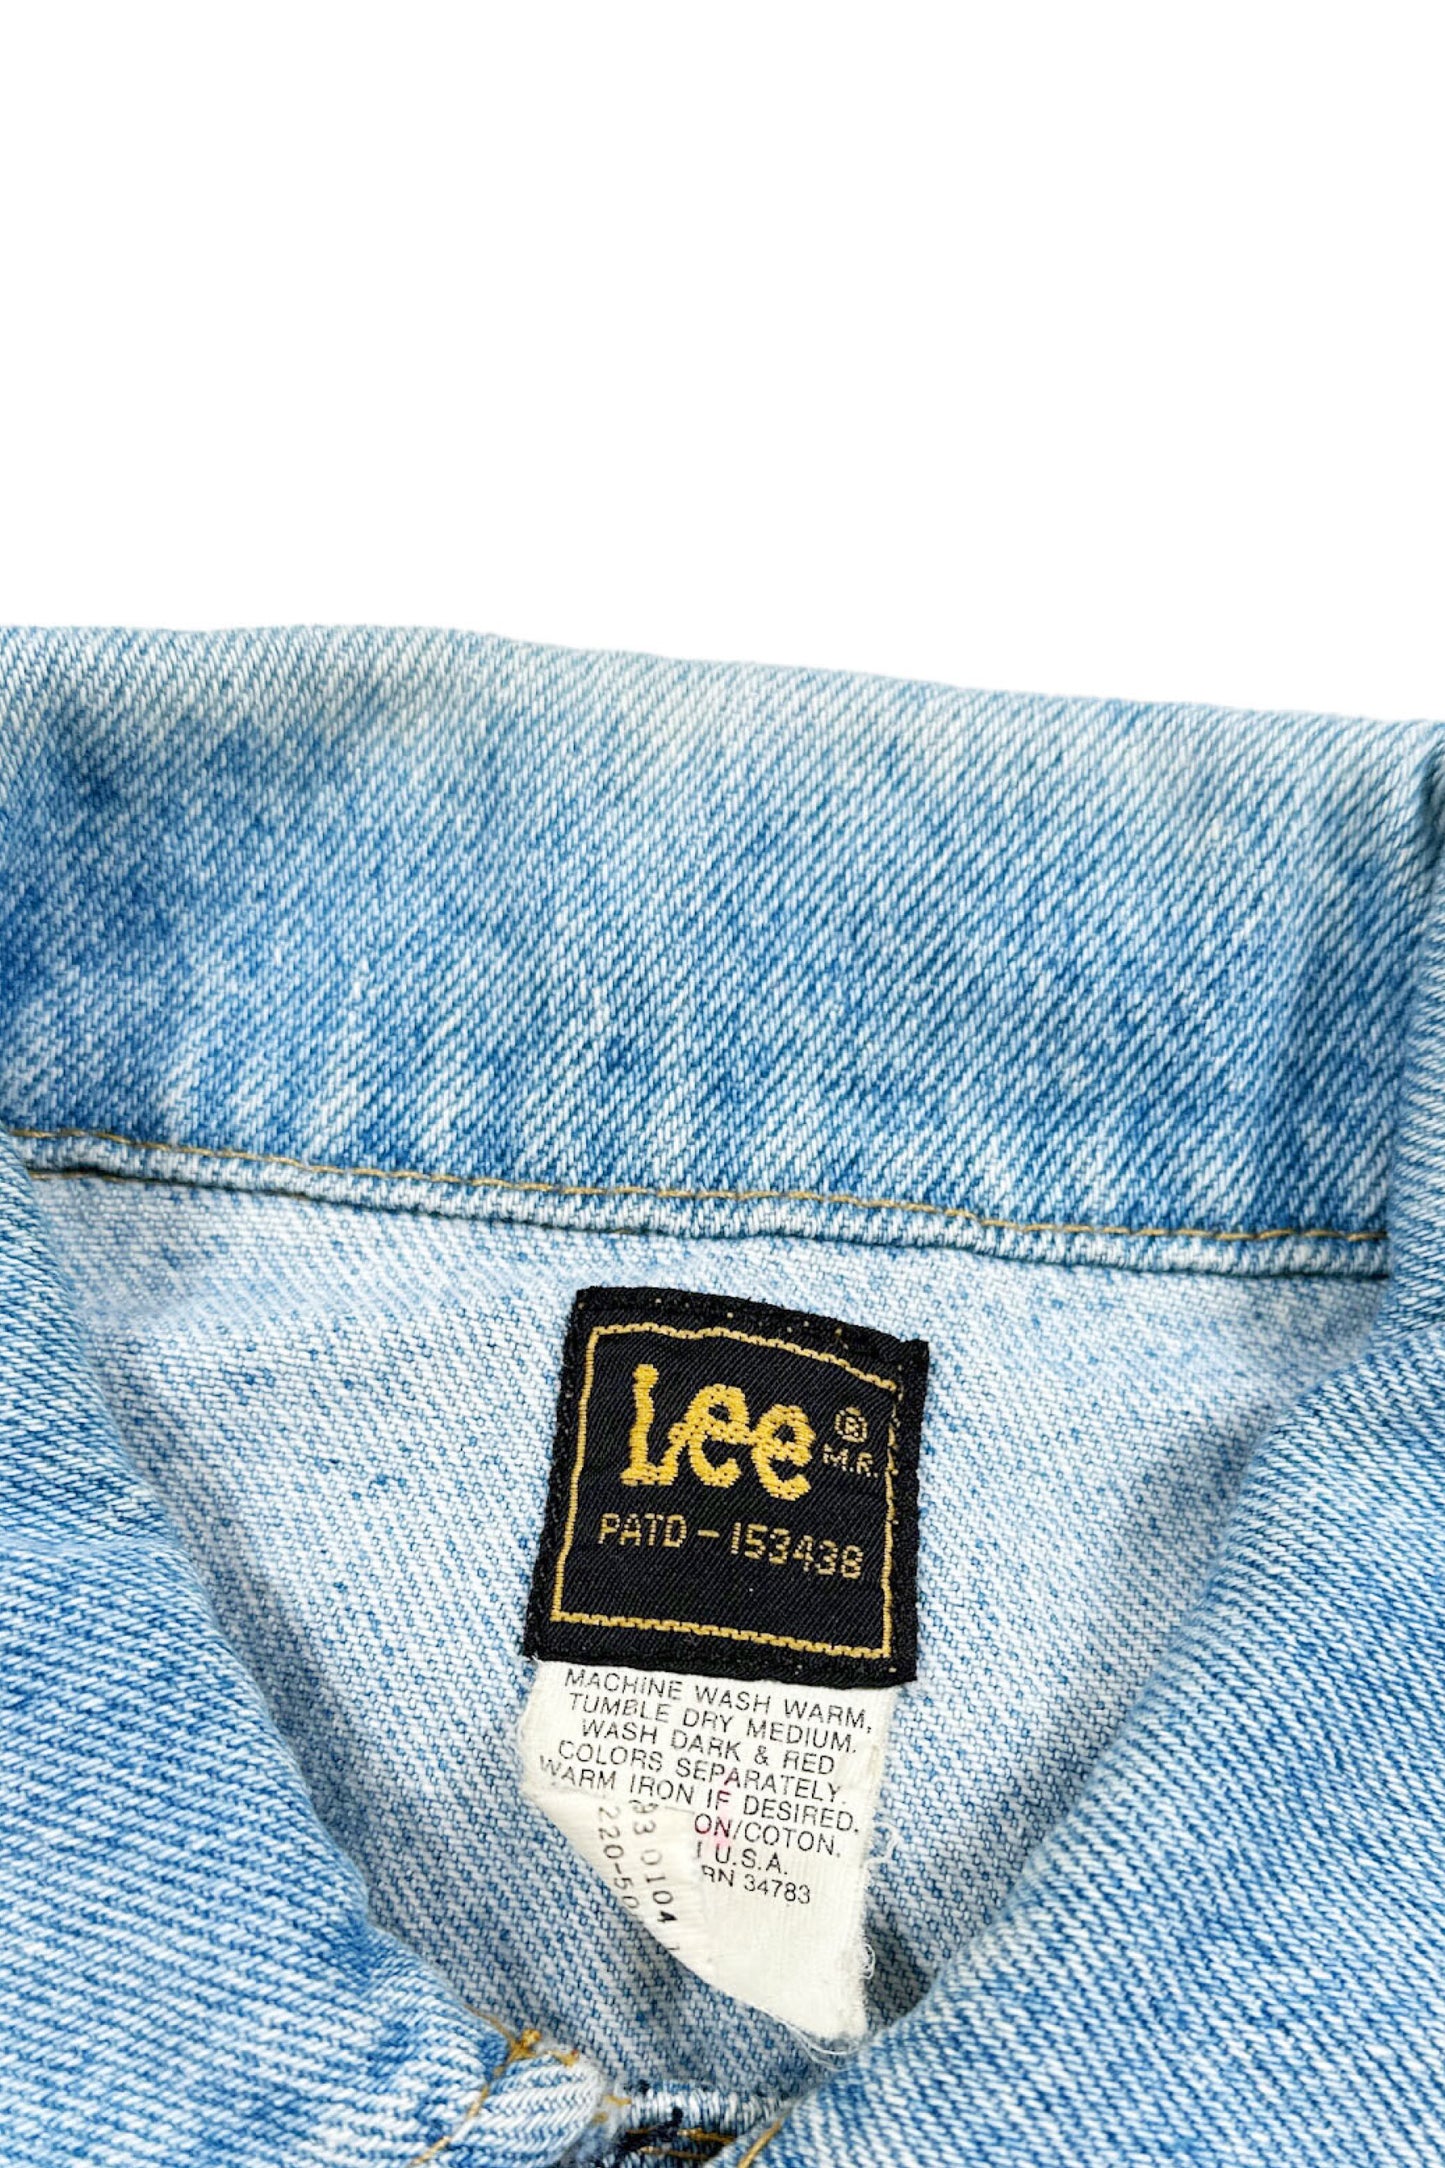 80‘s Made in USA Lee PATD-153438 denim jacket